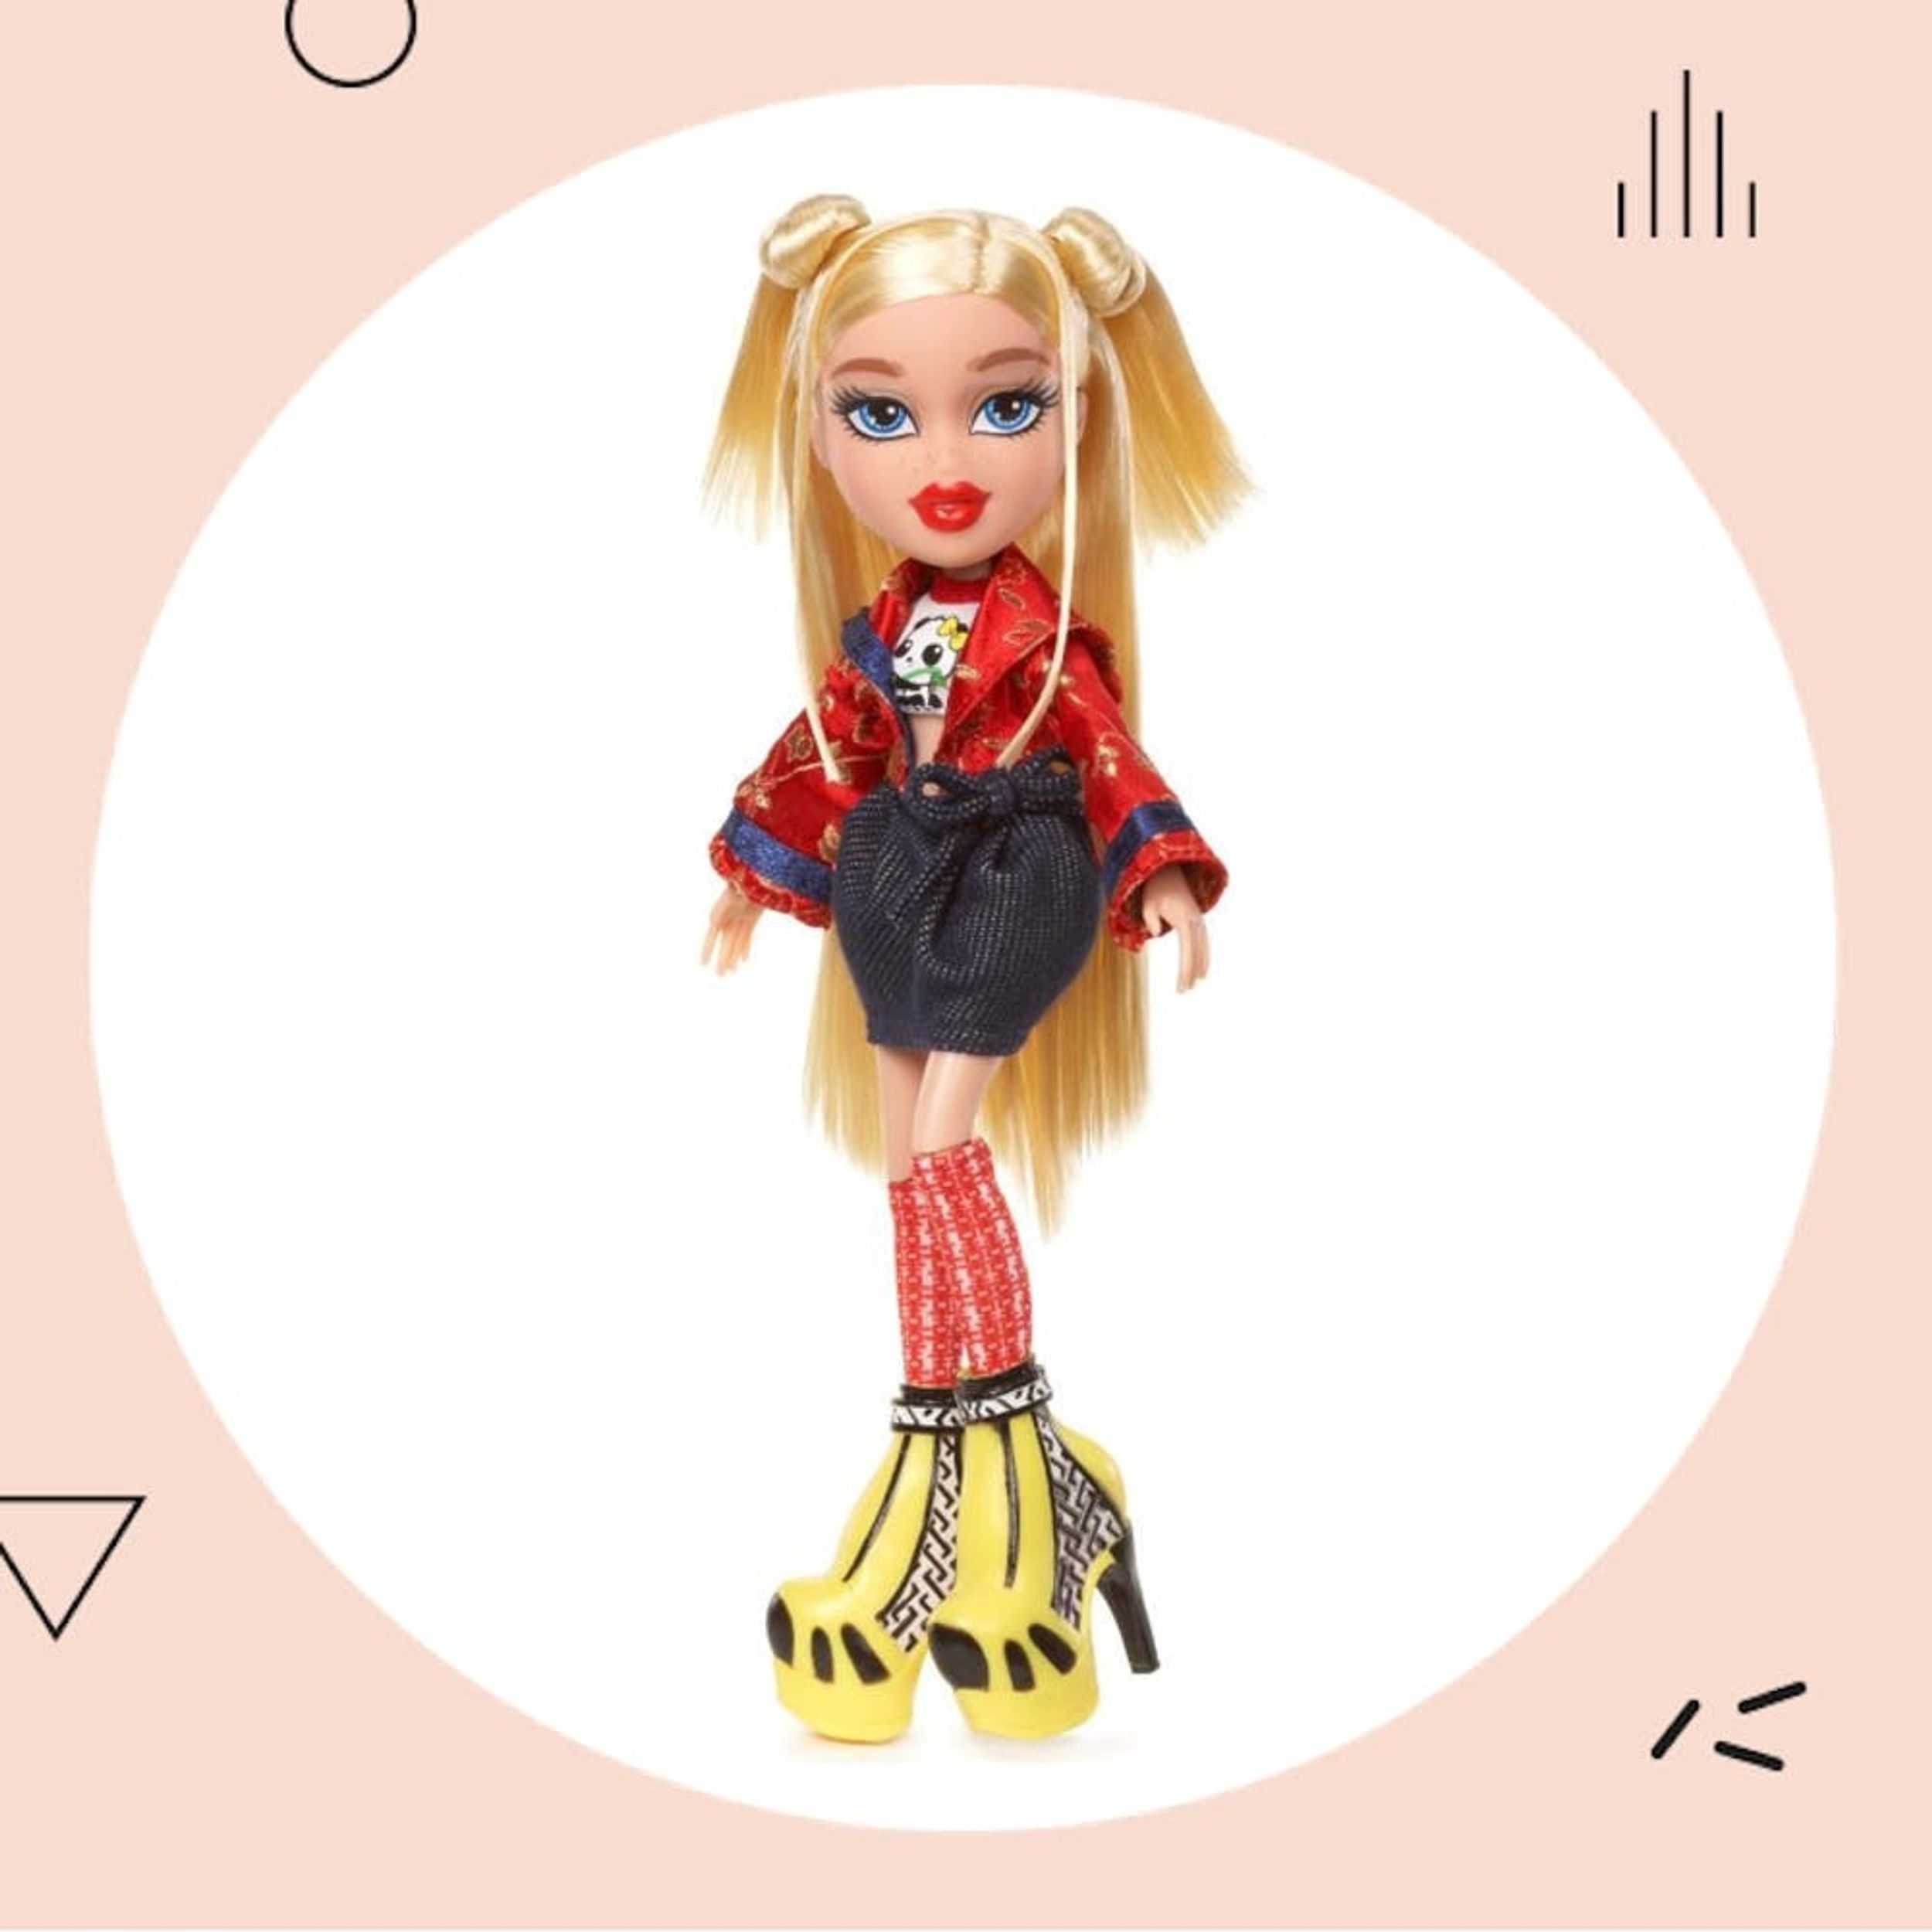 Bratz Dolls Are the Latest Beauty Inspiration Taking Over Instagram